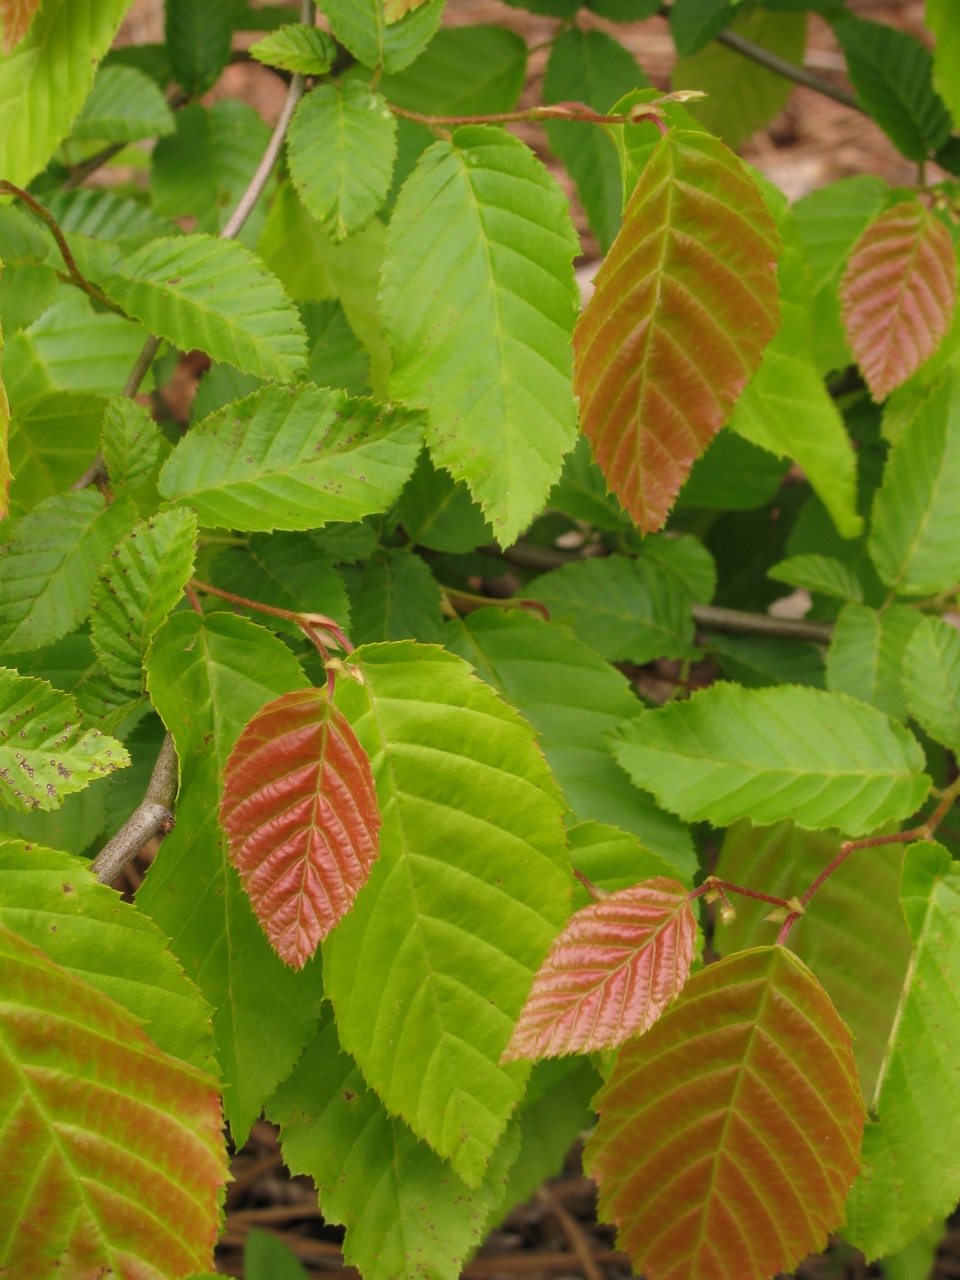 The Scientific Name is Carpinus caroliniana. You will likely hear them called American Hornbeam, Ironwood, Musclewood, Blue Beech. This picture shows the Colorful new Spring leaves of Carpinus caroliniana